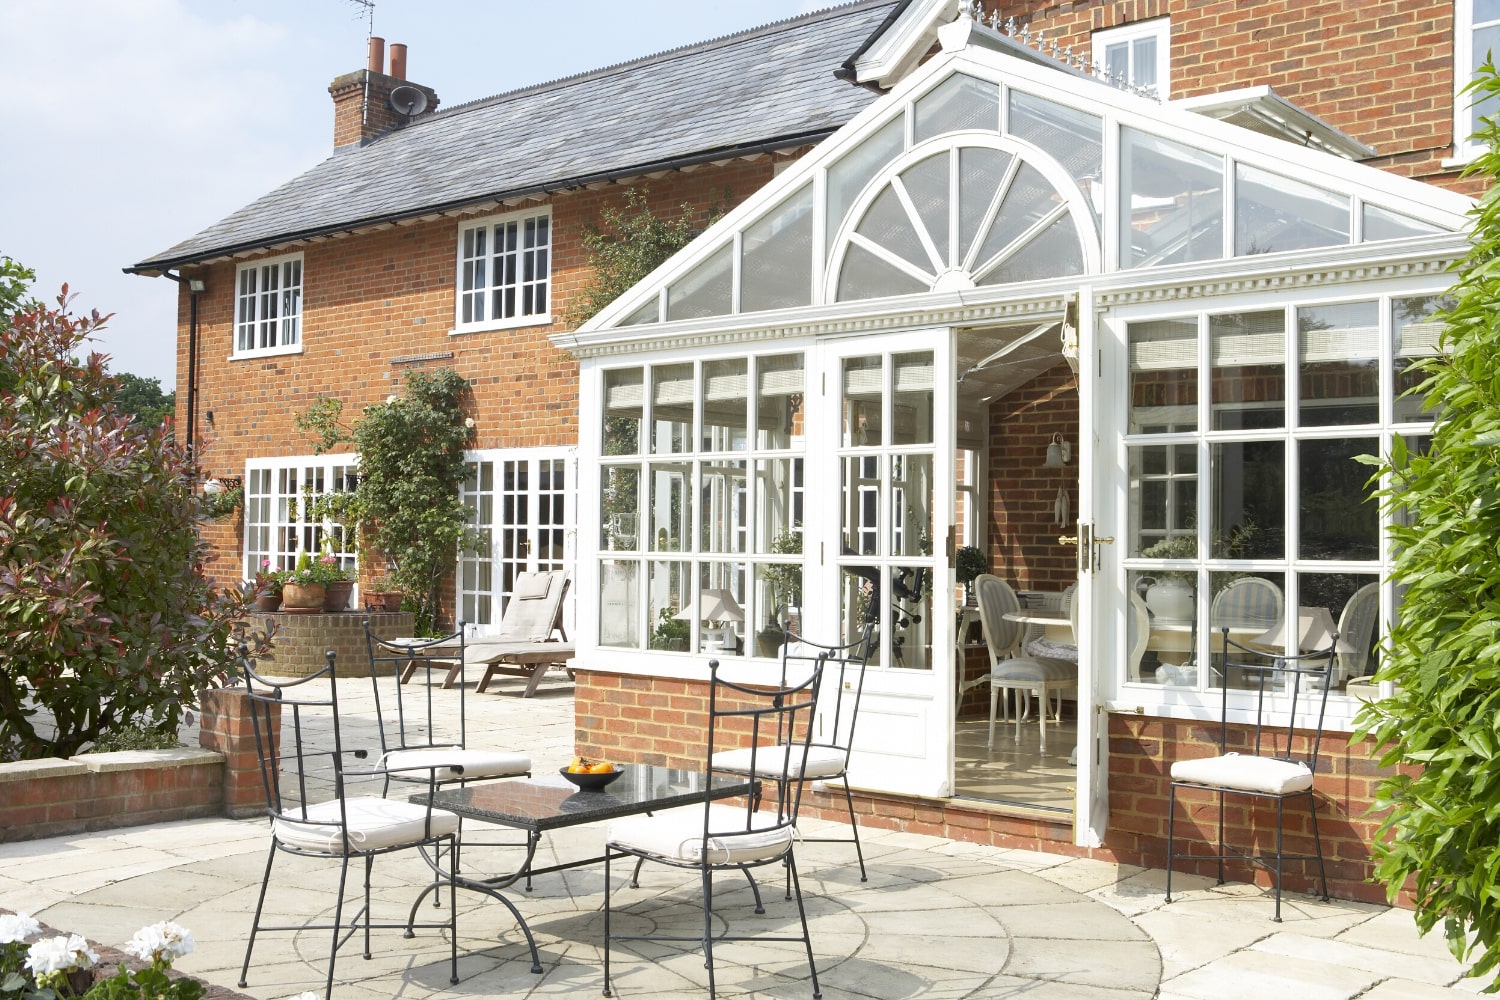 conservatory extension and patio on a brick home